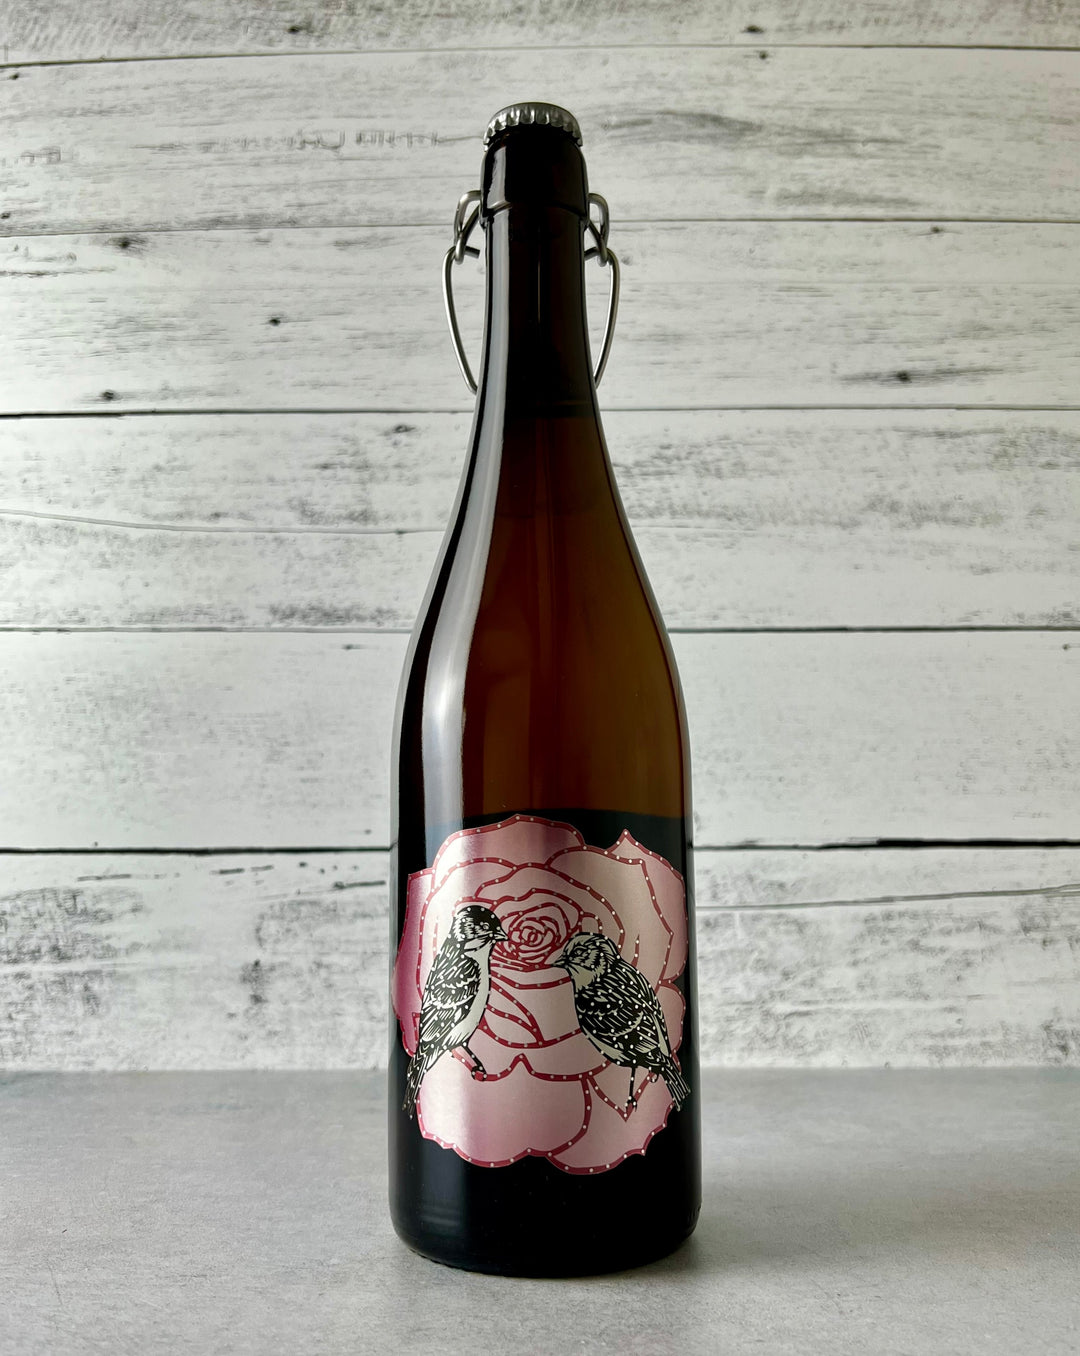 750 mL bottle of Art + Science Cider - Mountain Rose Single Varietal, with artistic label depicting a pink rose with two birds